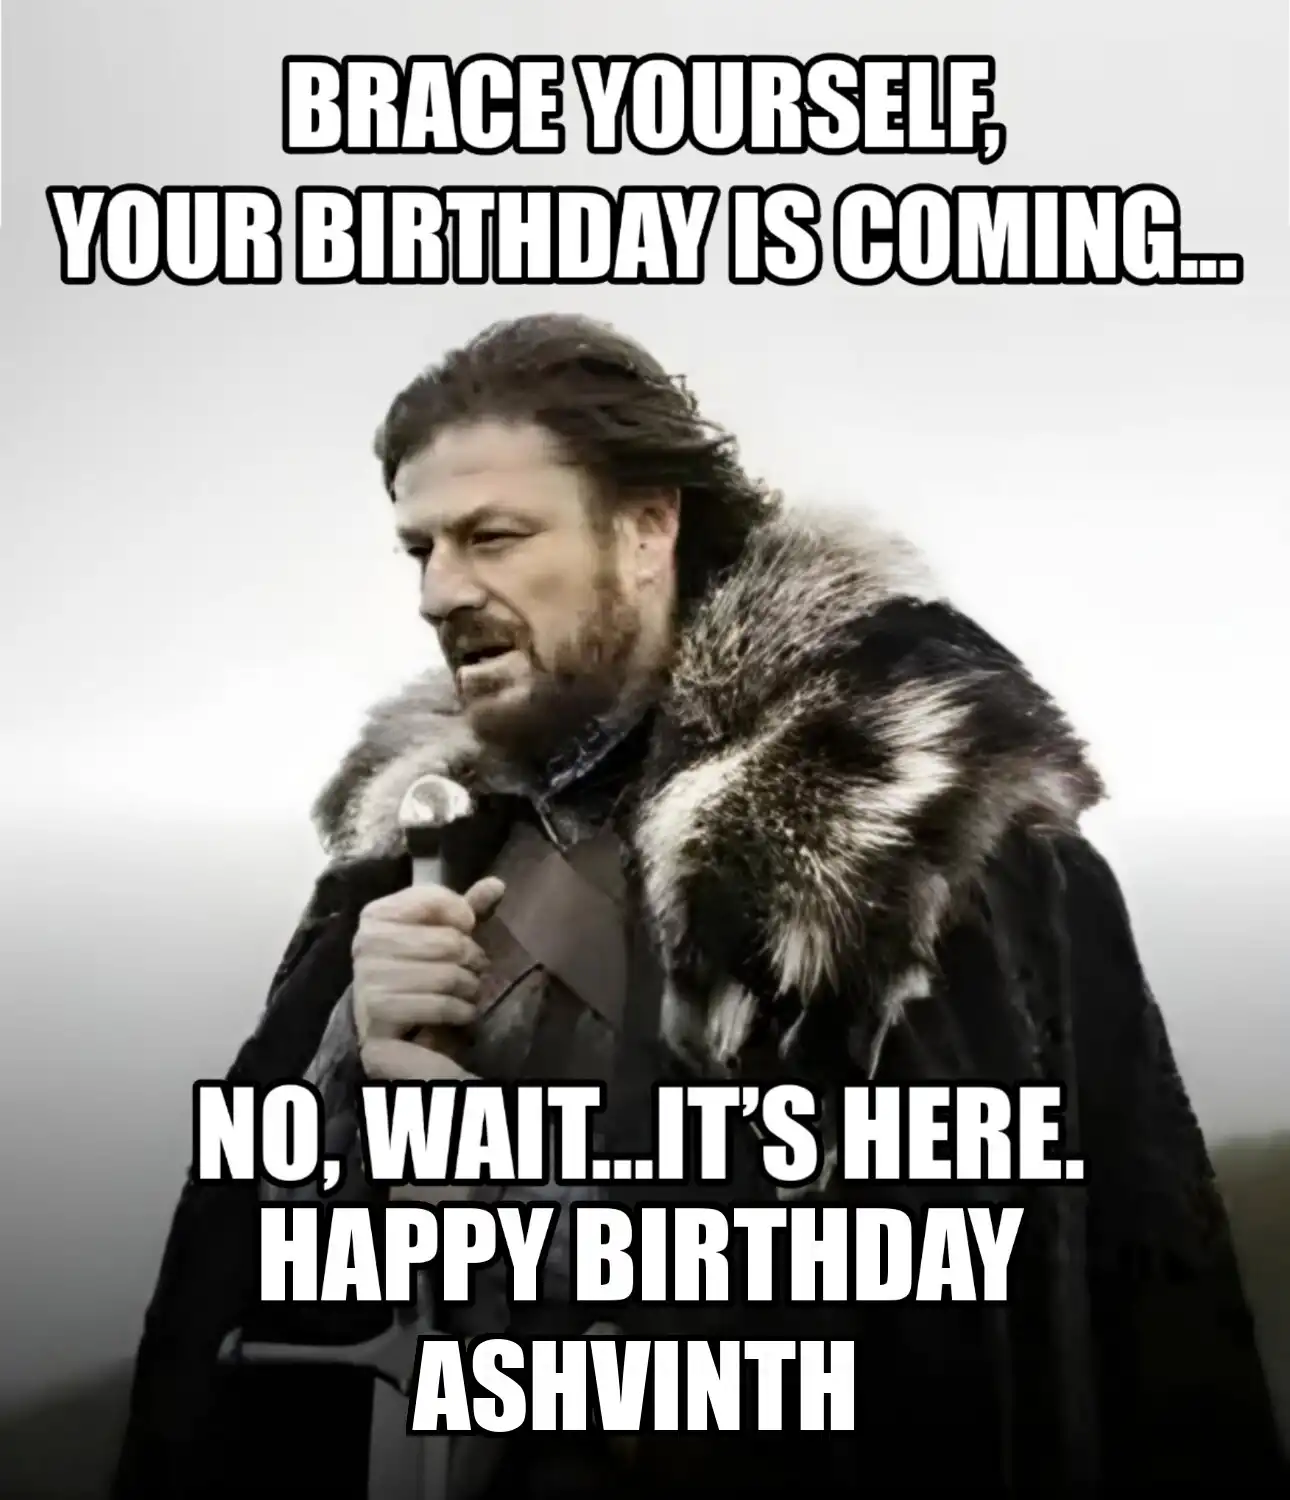 Happy Birthday Ashvinth Brace Yourself Your Birthday Is Coming Meme